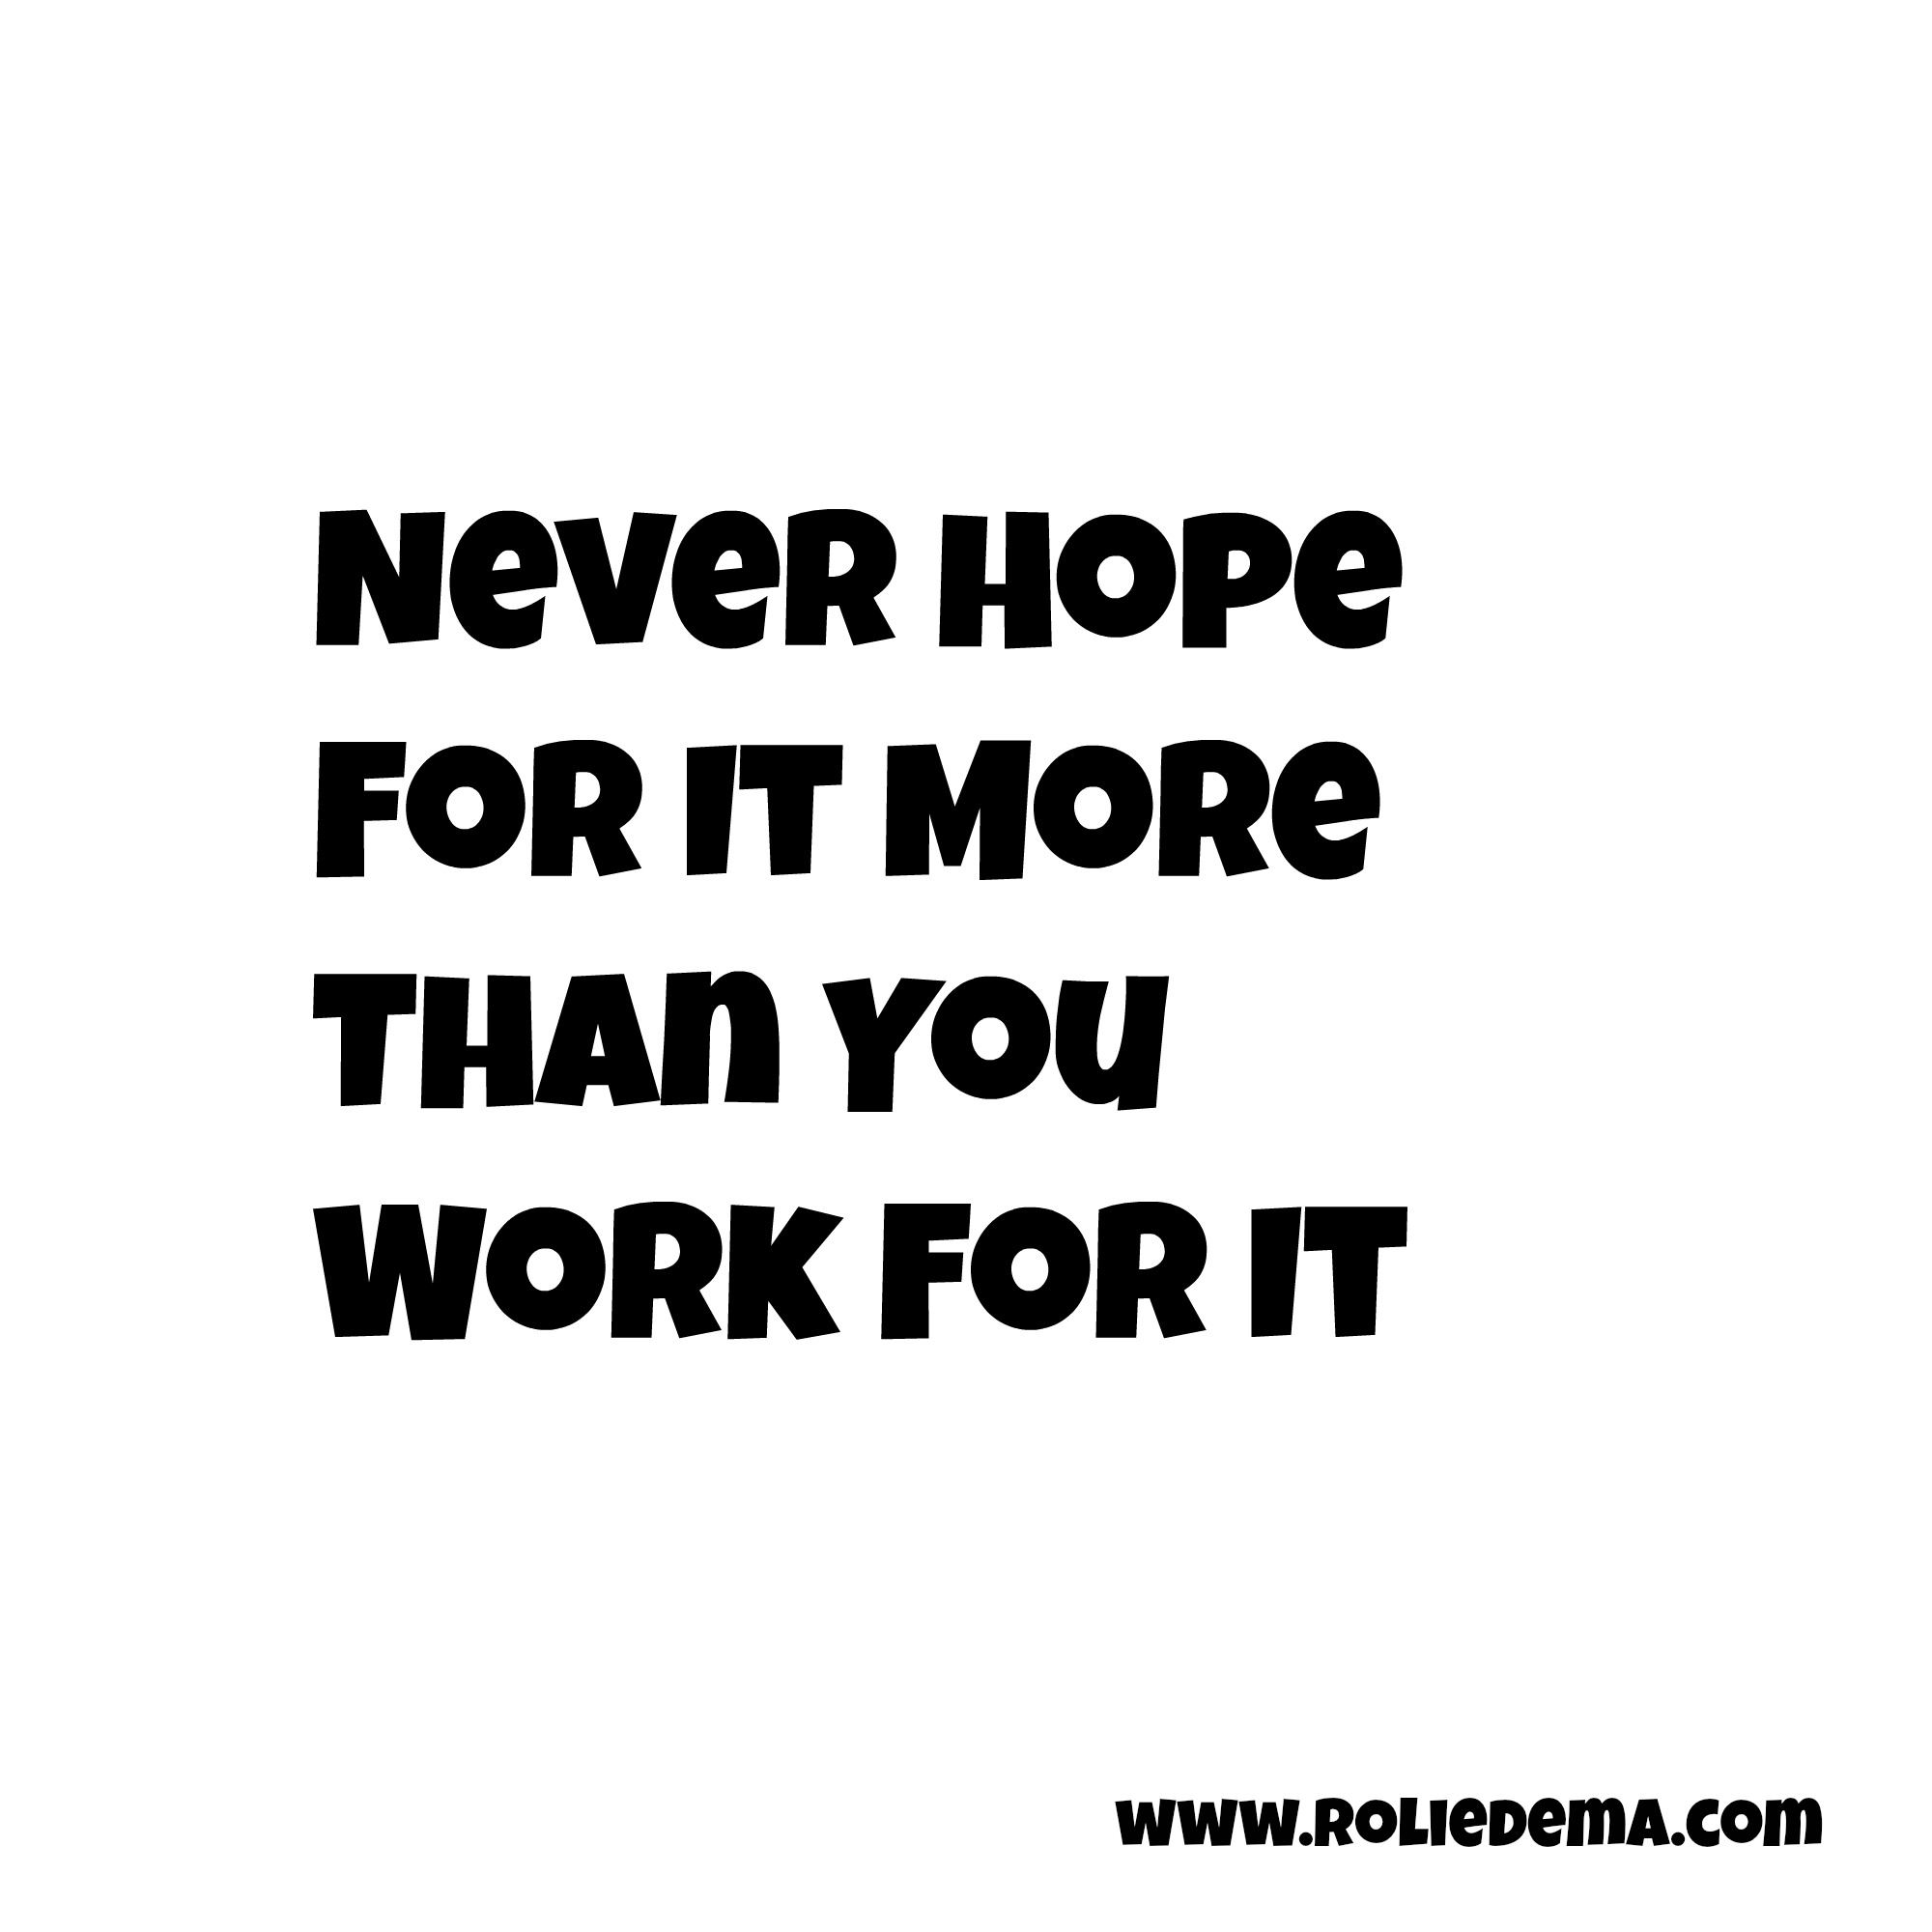 Never Hope For It More Than You Work For It